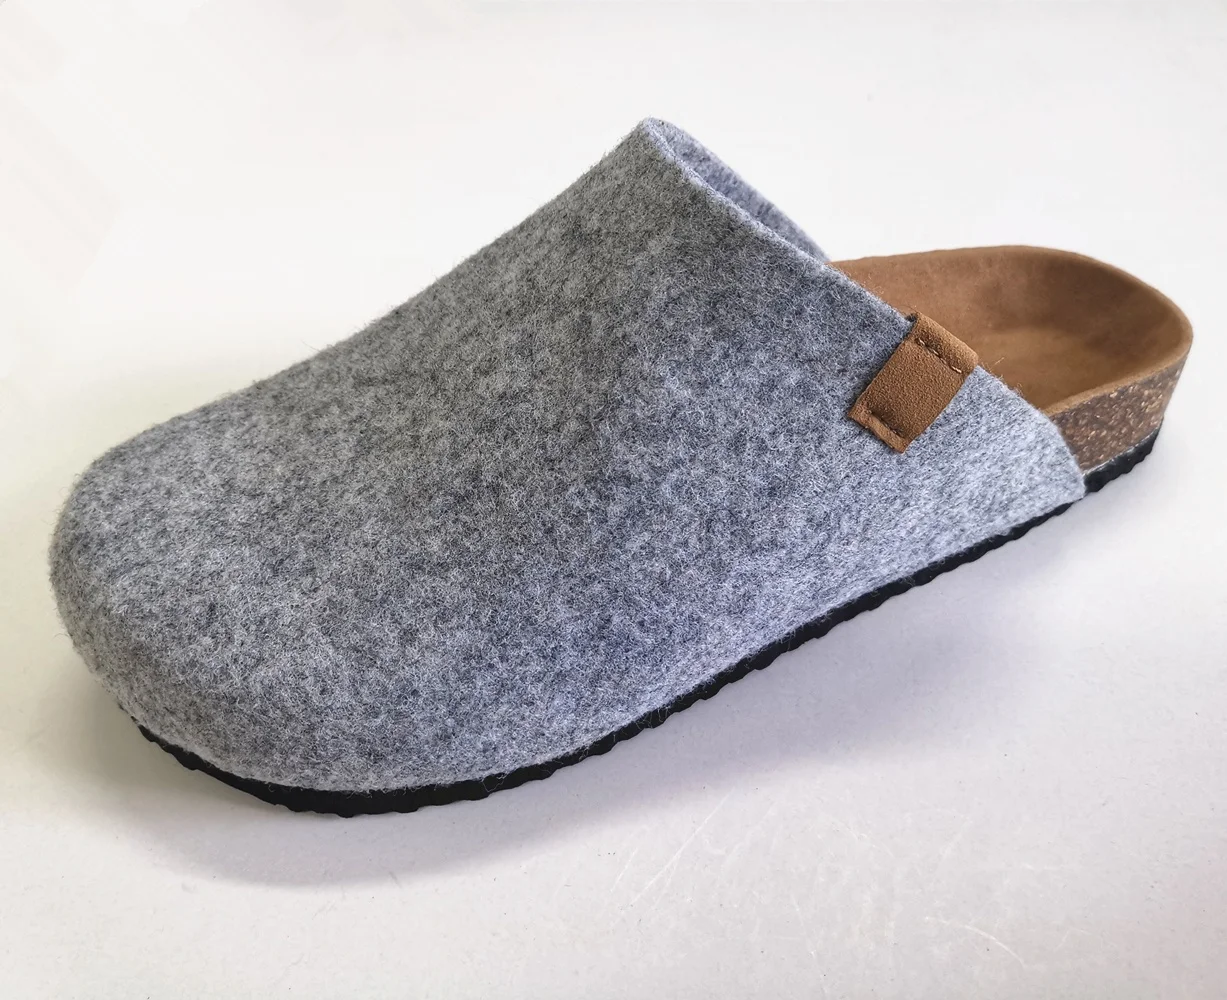 

Wholesale Prime Quality Women's Felt Clogs Slippers for Indoor Outdoor with Comfortable Bio Cork Foot-bed